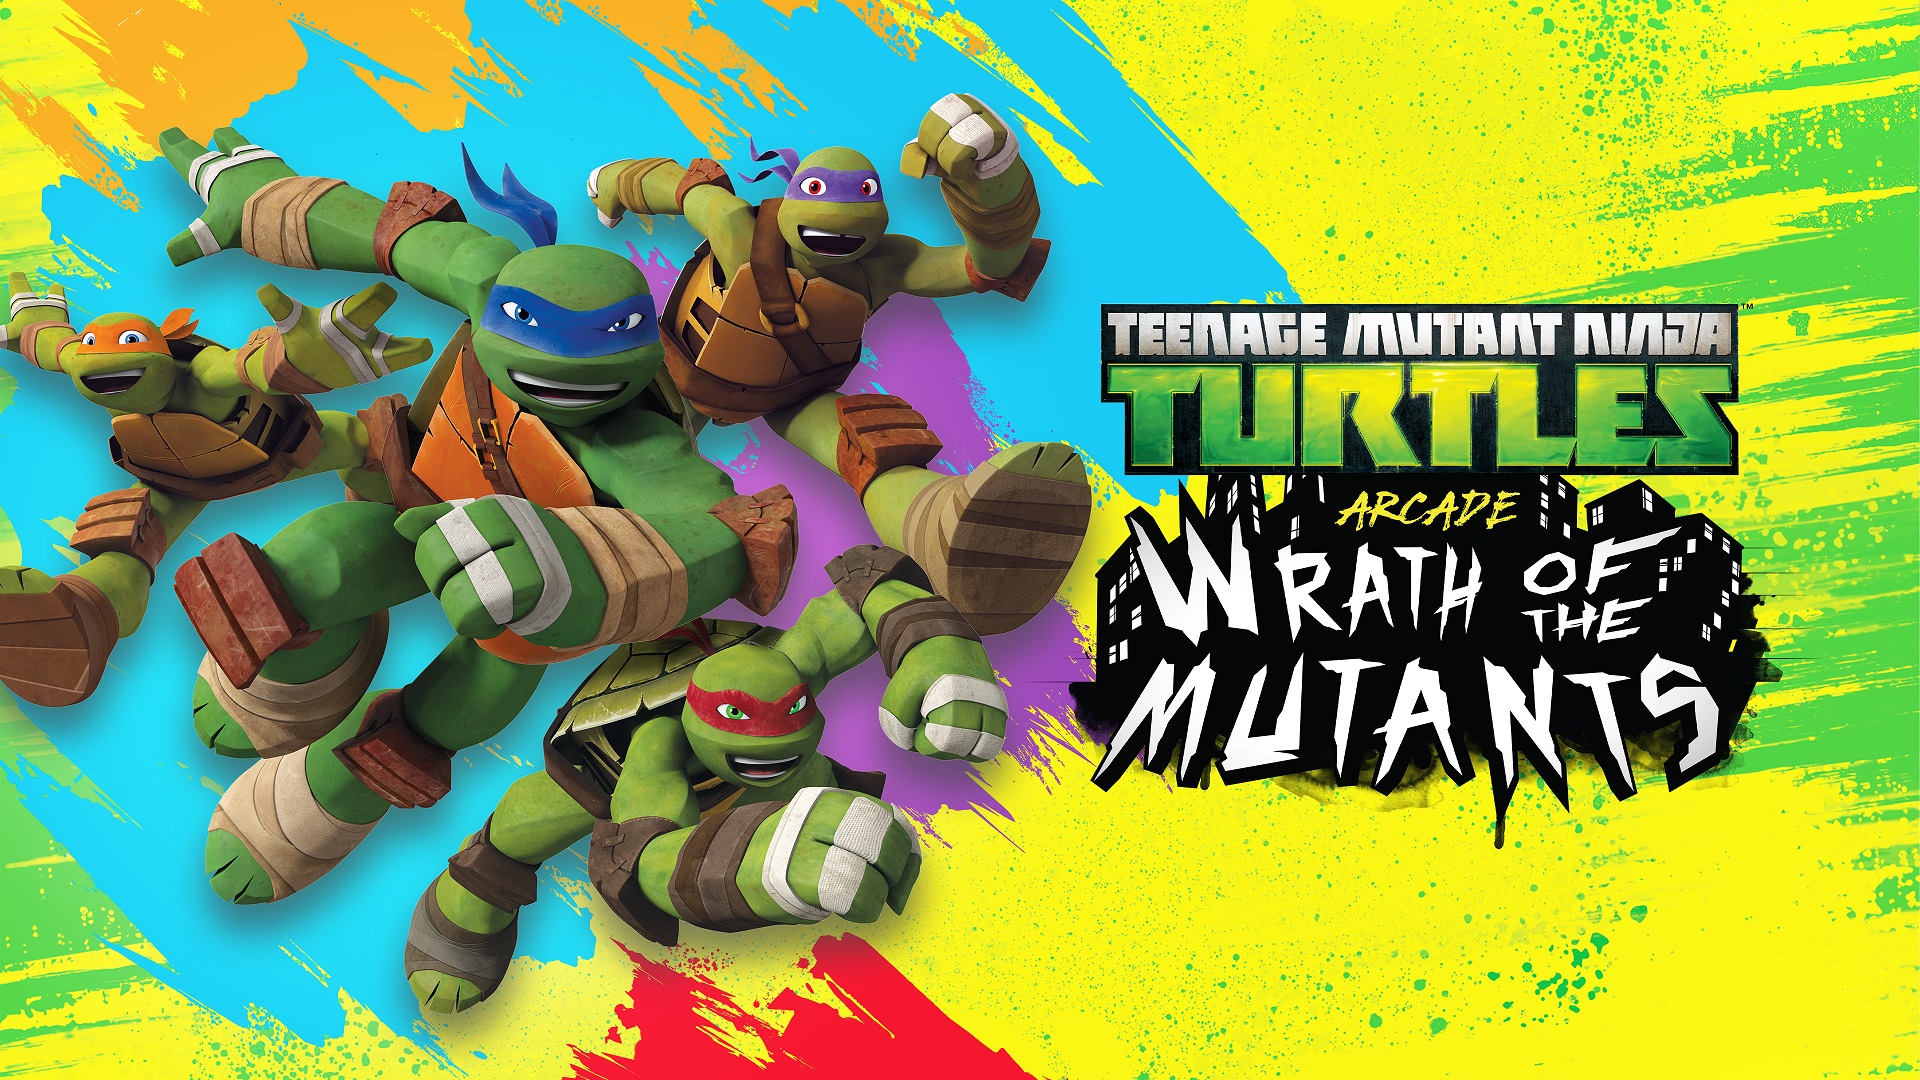 TMNT Arcade: Wrath of the Mutants is a classic beat ’em up